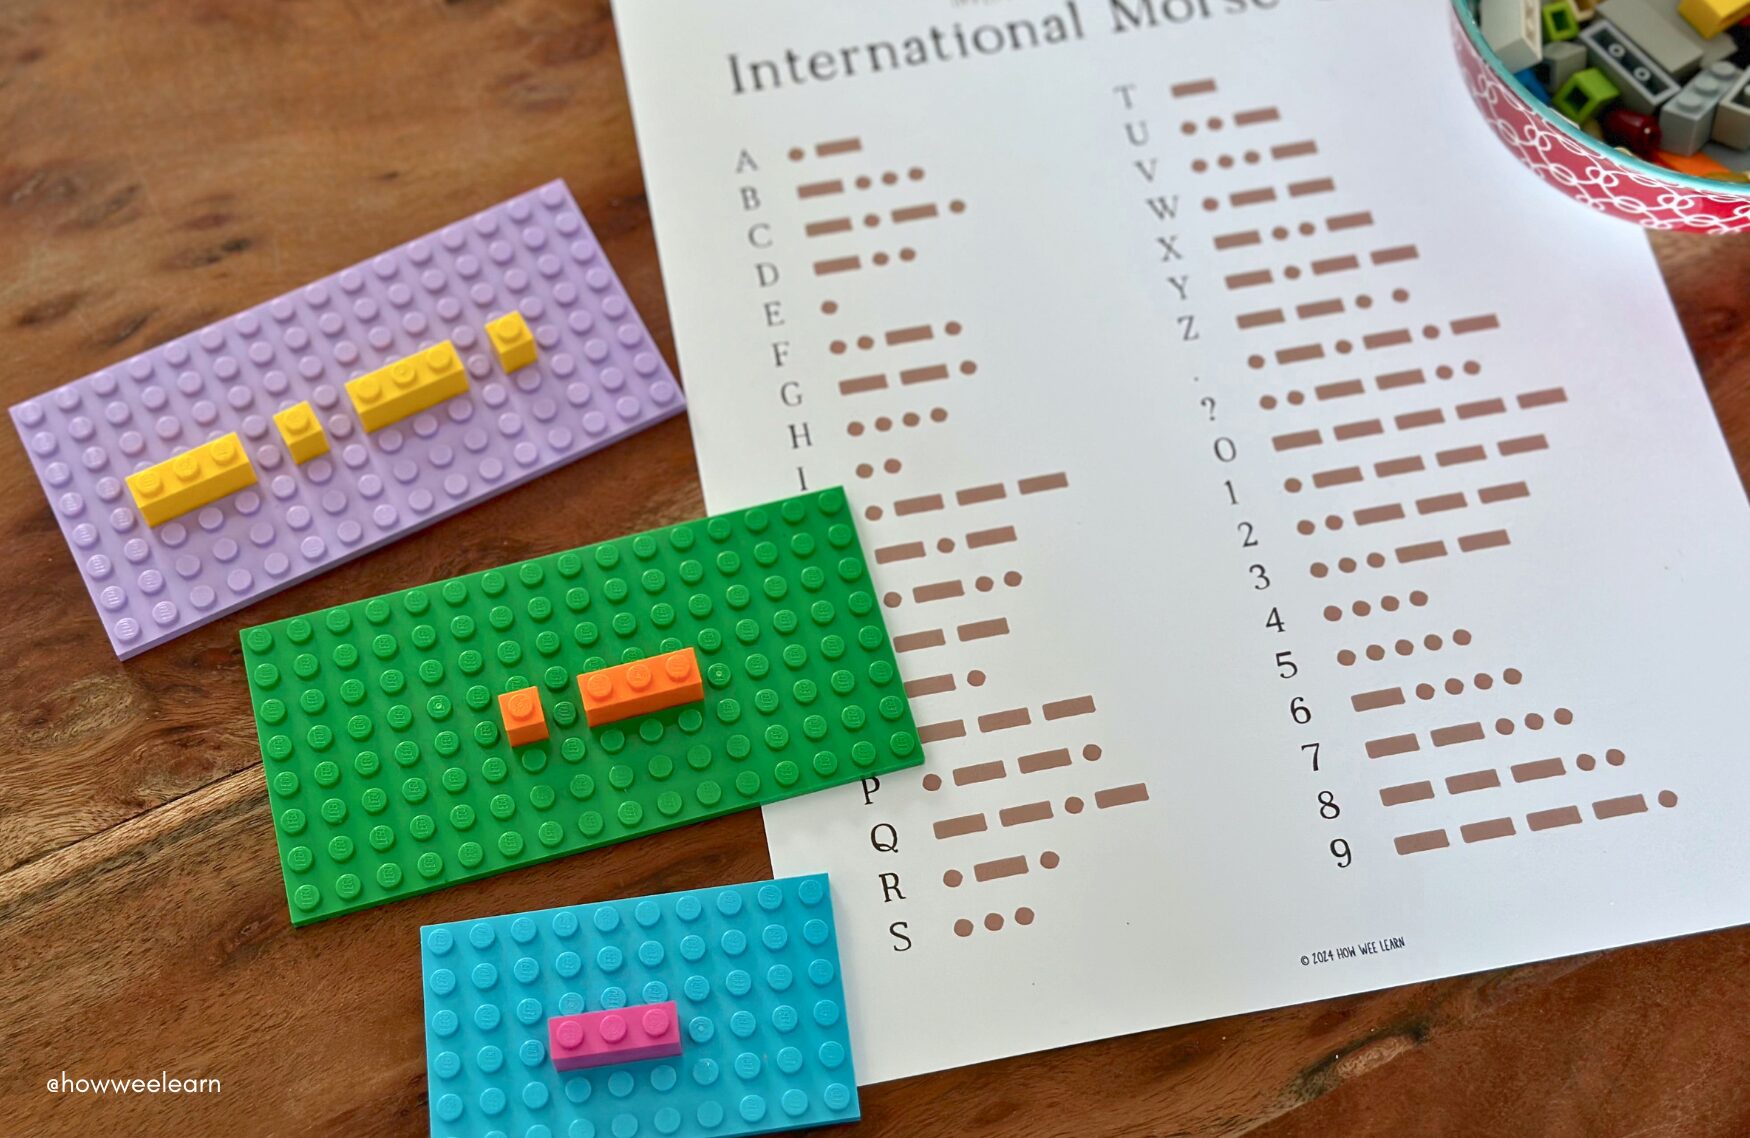 International morse code printable with lego bricks showing the letters C A T on base plates